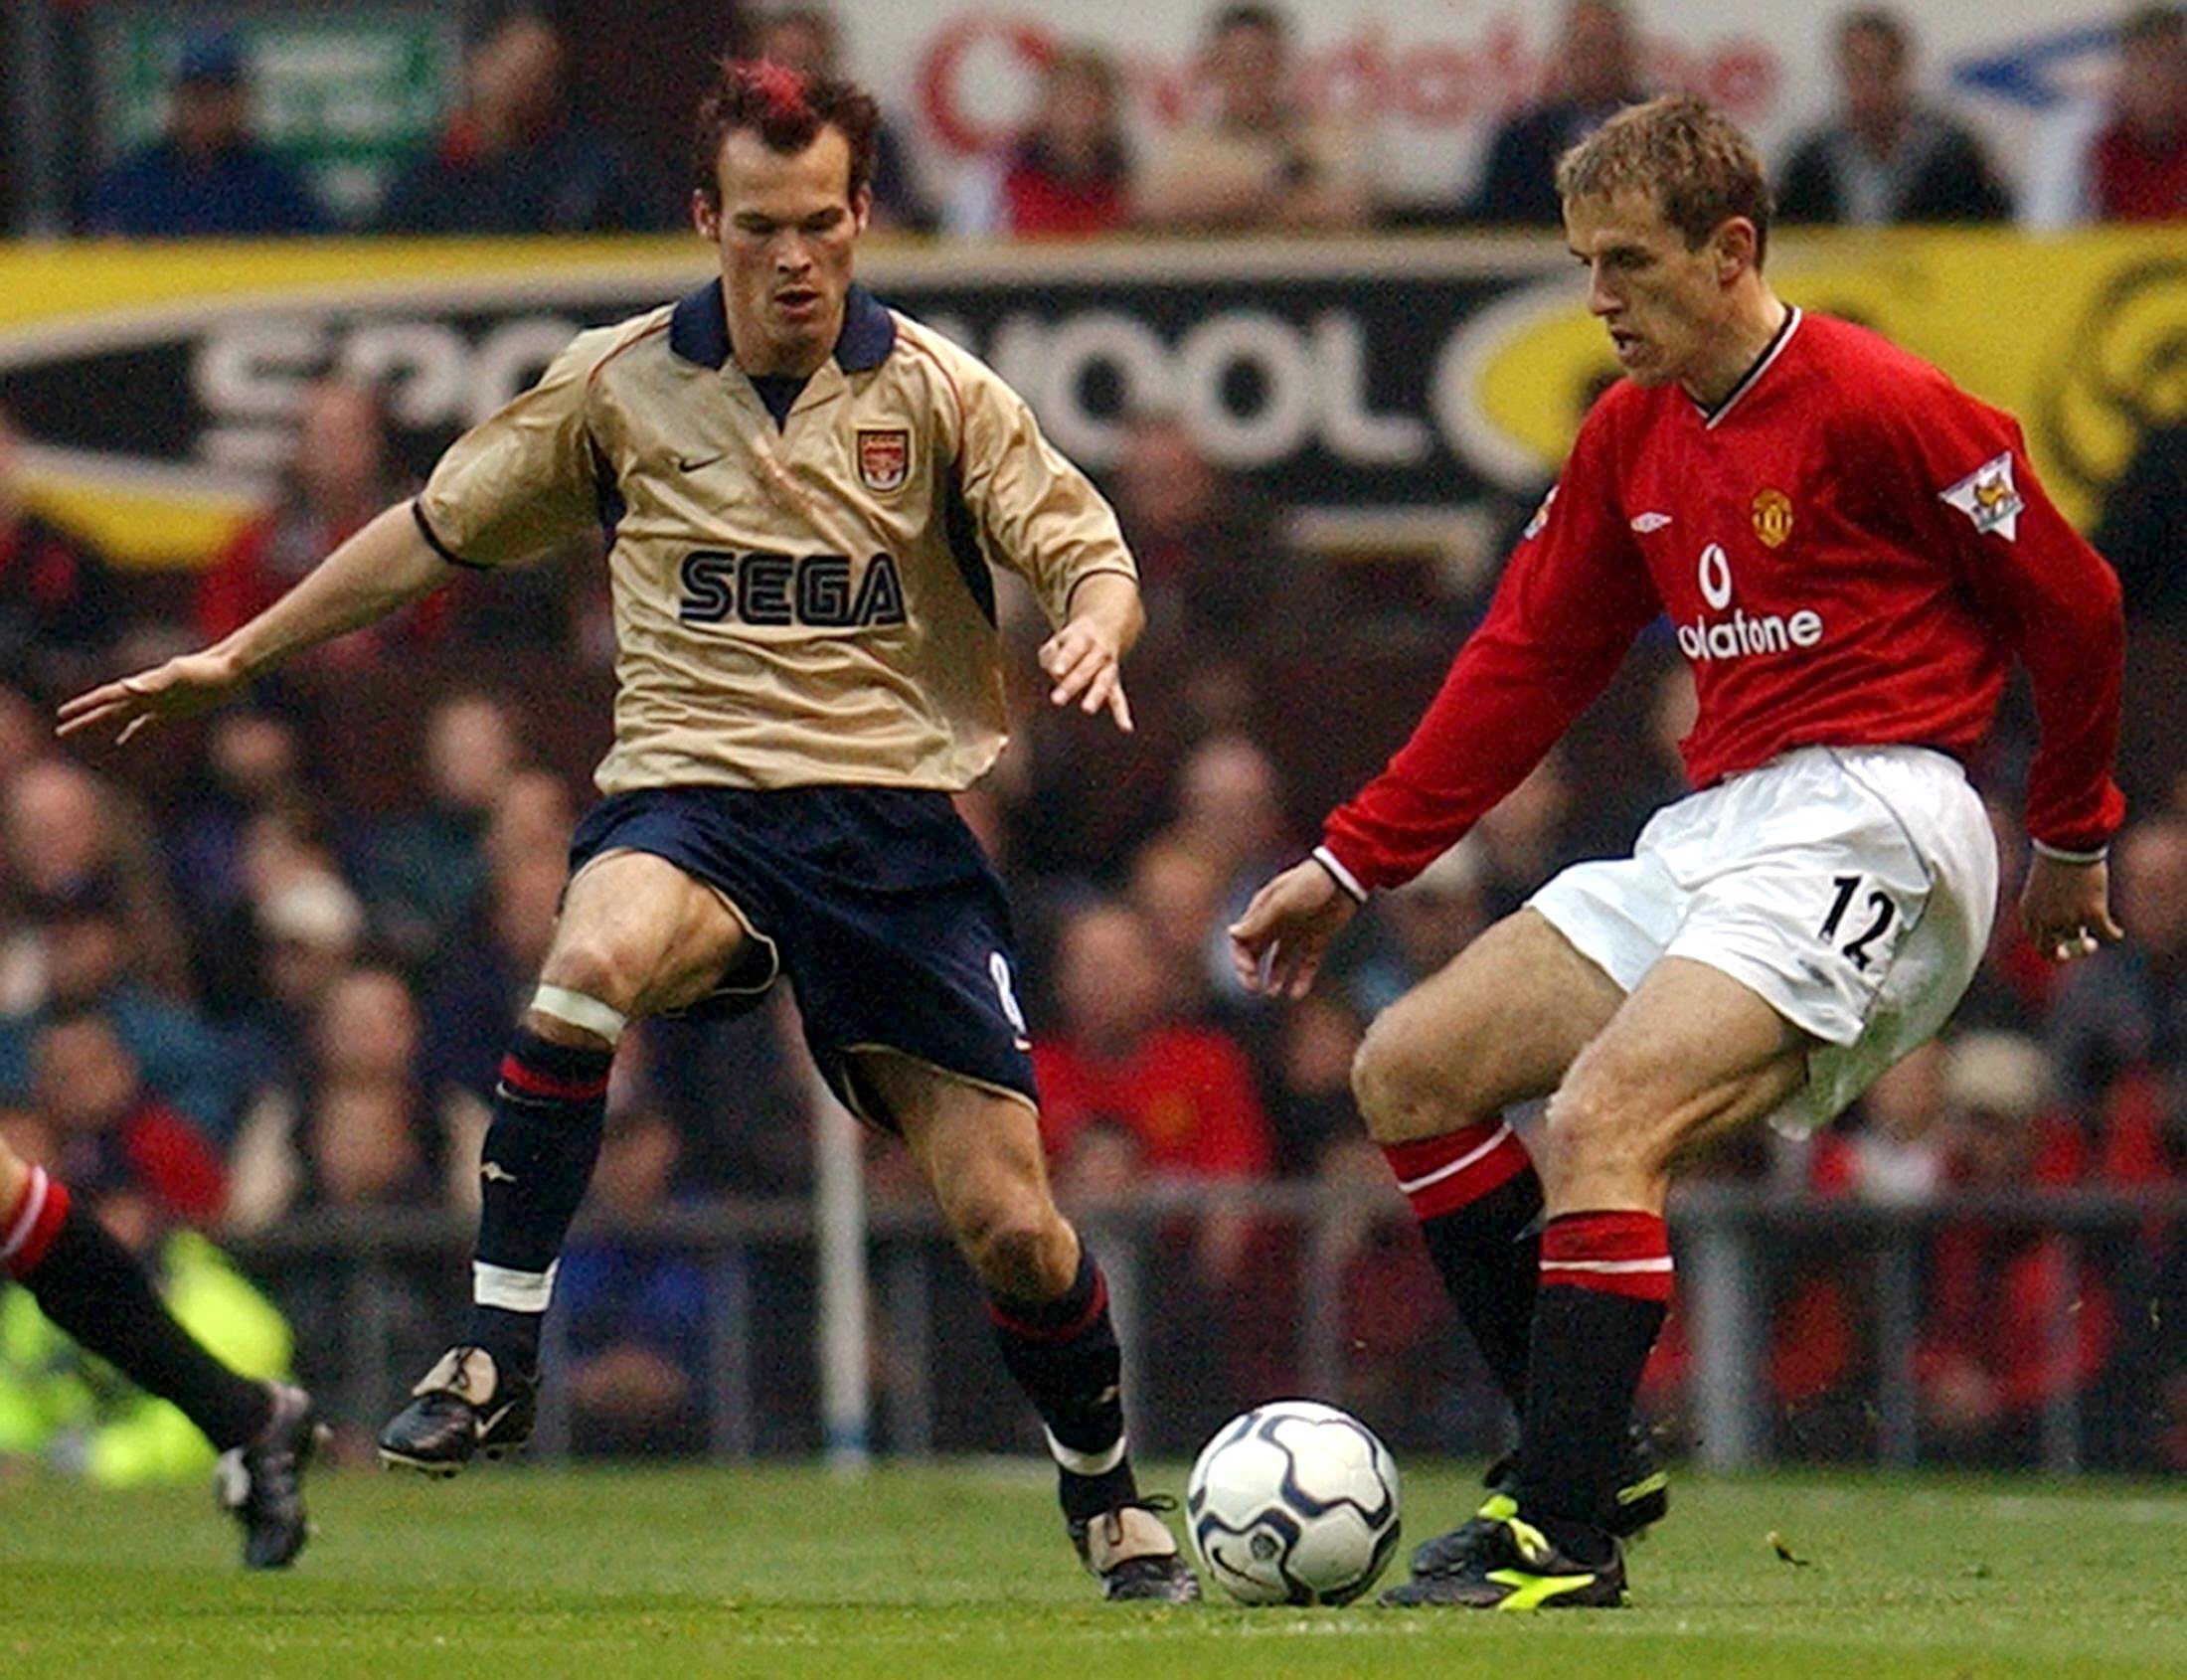 ODD001 - 20020508 - MANCHESTER, UNITED KINGDOM: Arsenal's Frederik Ljungberg (L) challenges Gary Neville of Manchester United during a premier league match at Old Trafford, 08 May 2002. Arsenal will clinch the premiership and secure their double with a win or draw. EPA PHOTO  EPA  PAUL BARKER